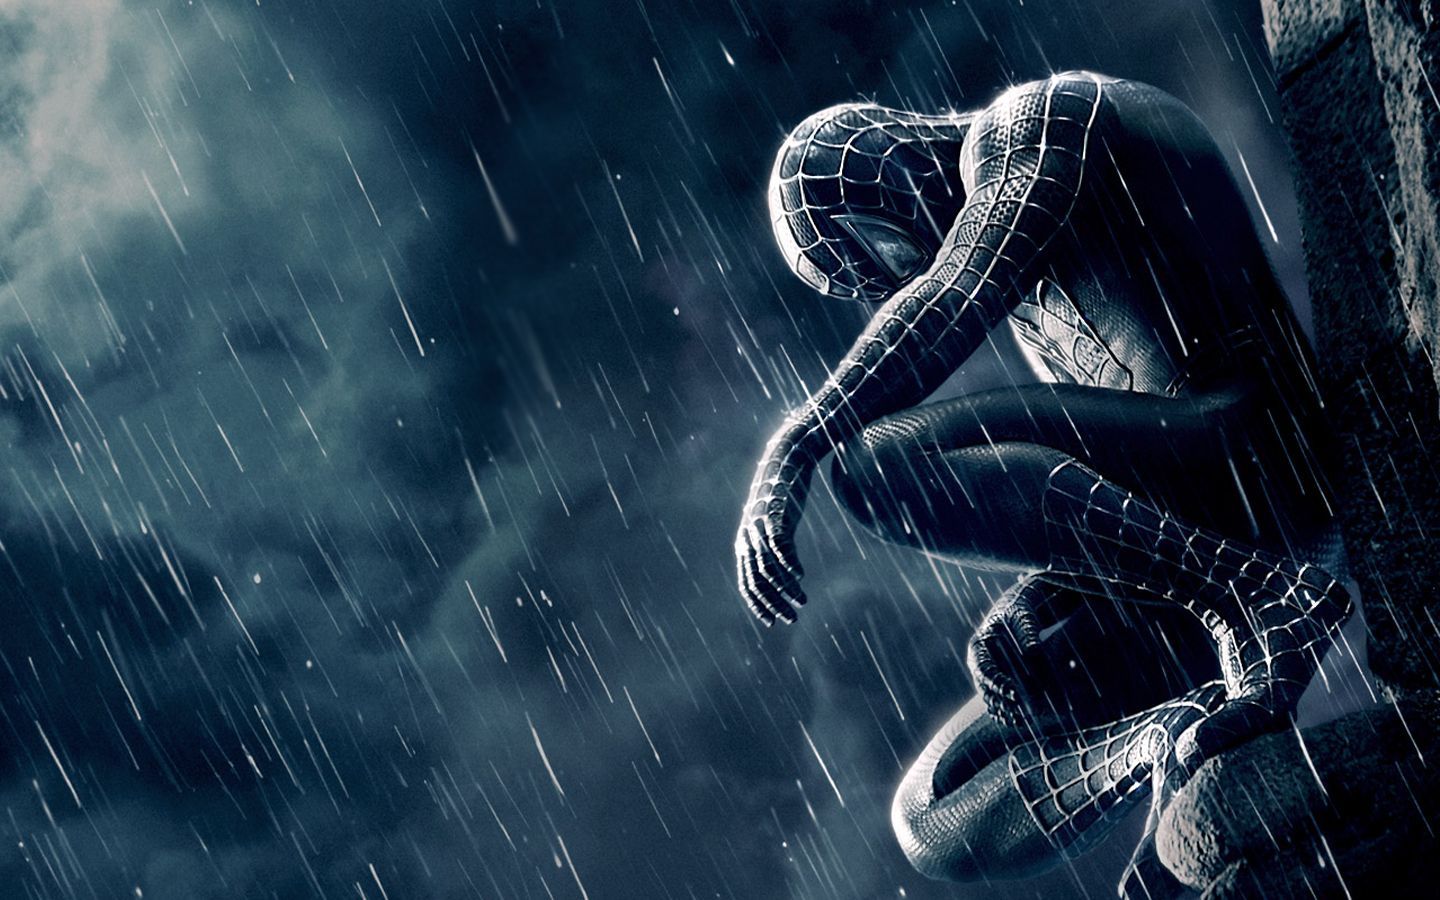 Background wallpaper, Spiderman 3 Black Widescreen for Fans